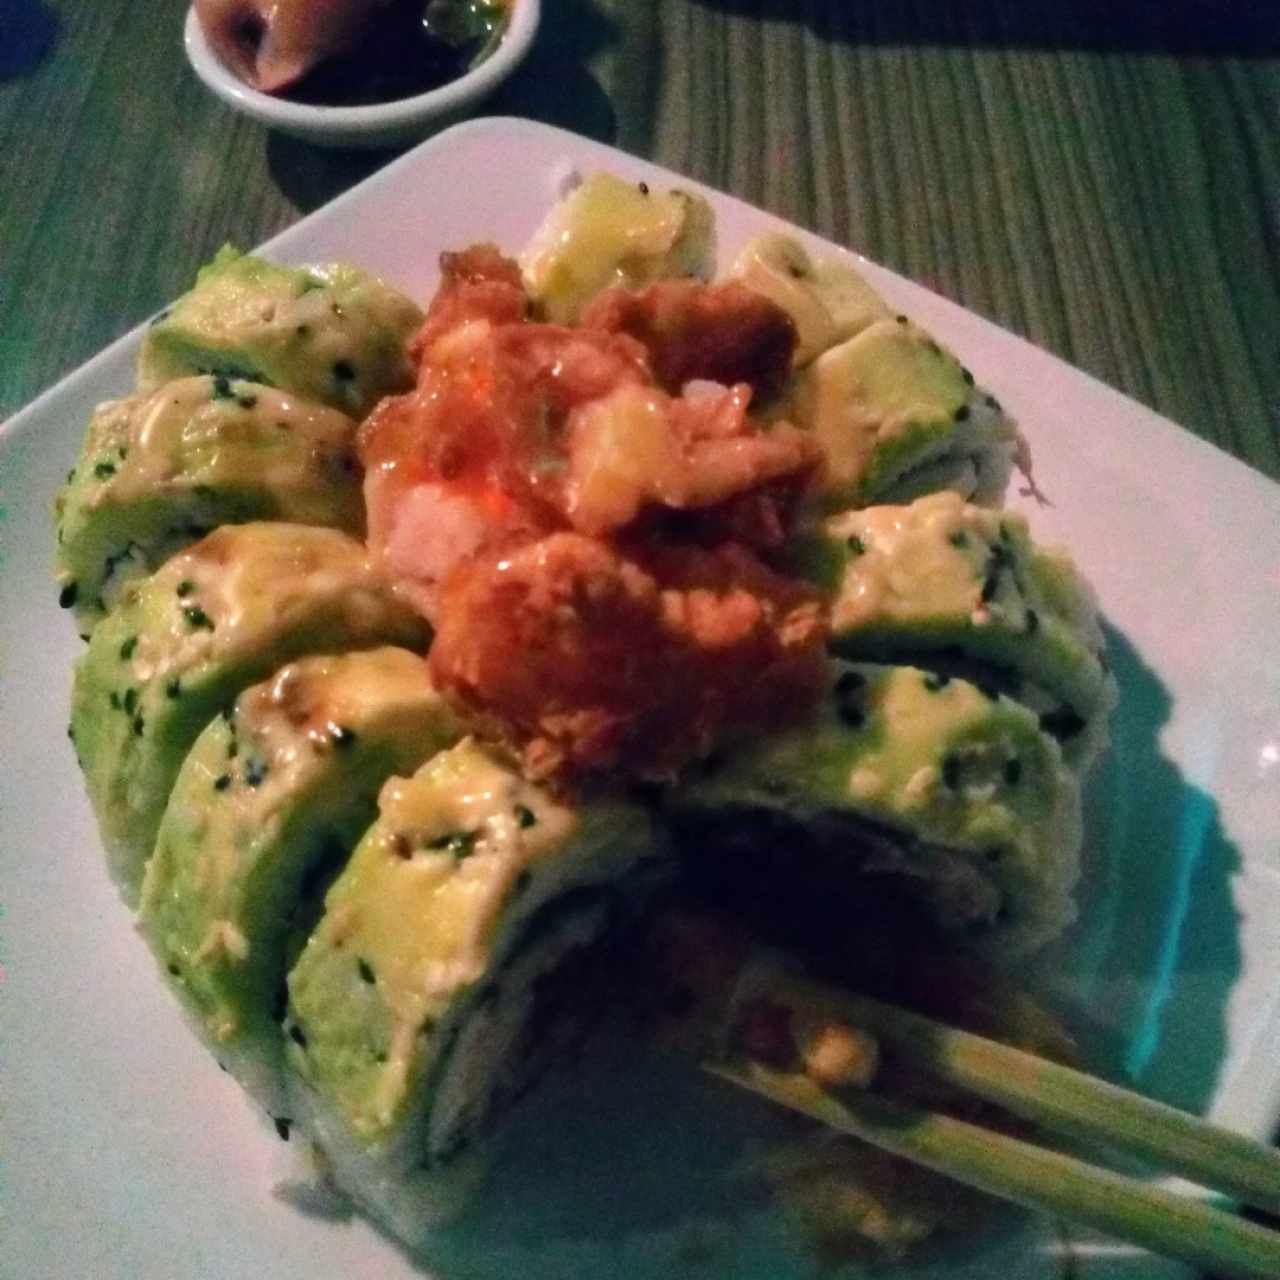 tropical roll 😋